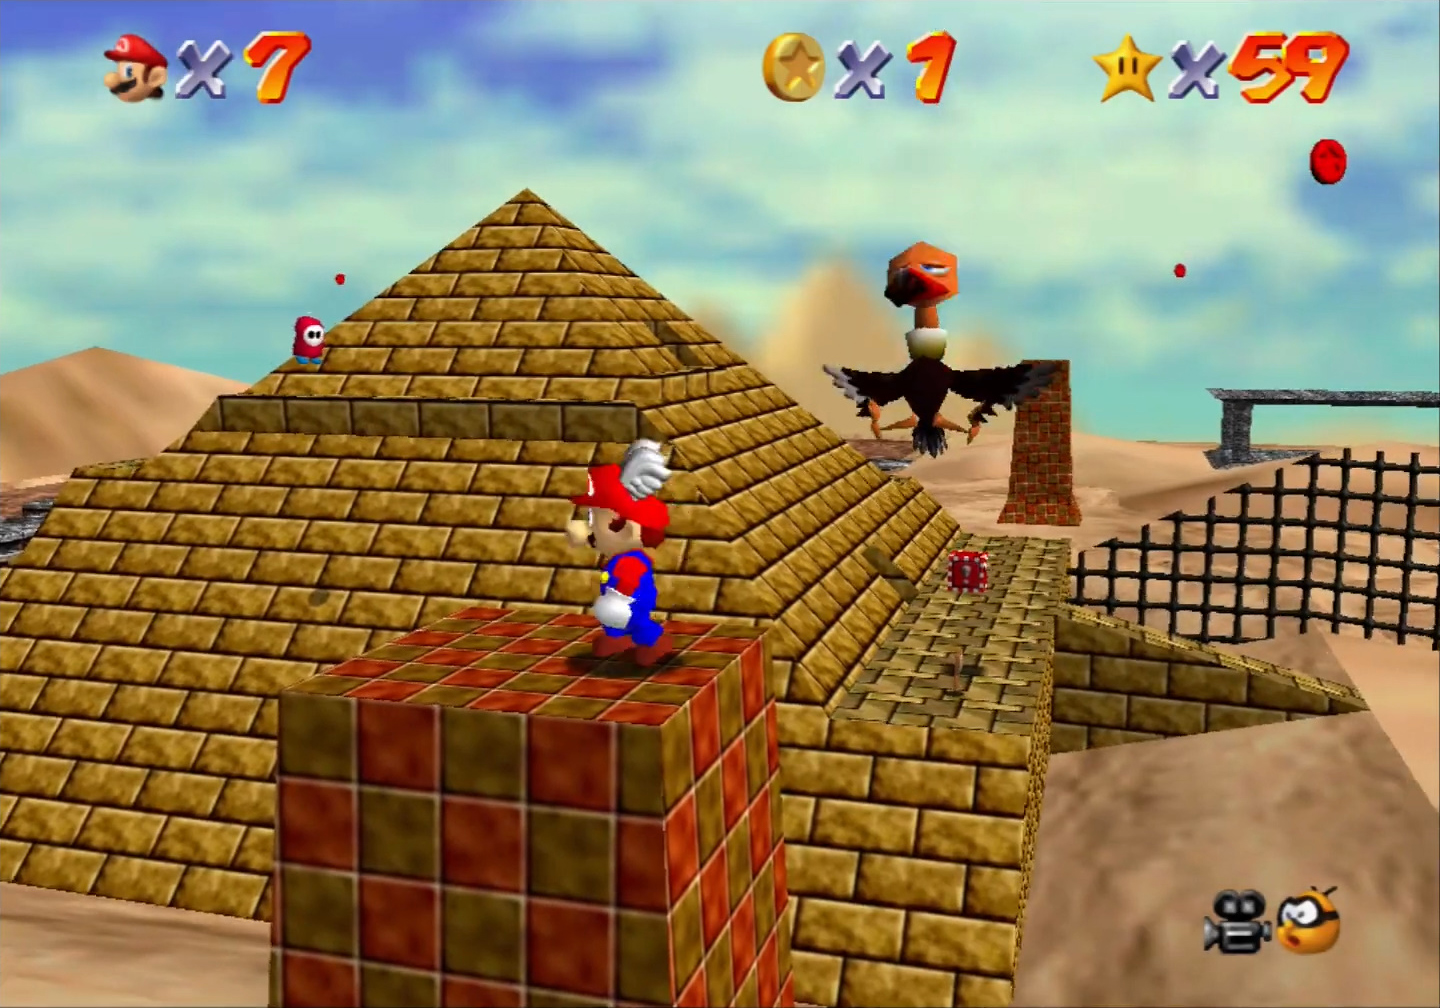 Super Mario 64 - 1. In the Talons of the Big Bird - Shifting Sand Land 2.